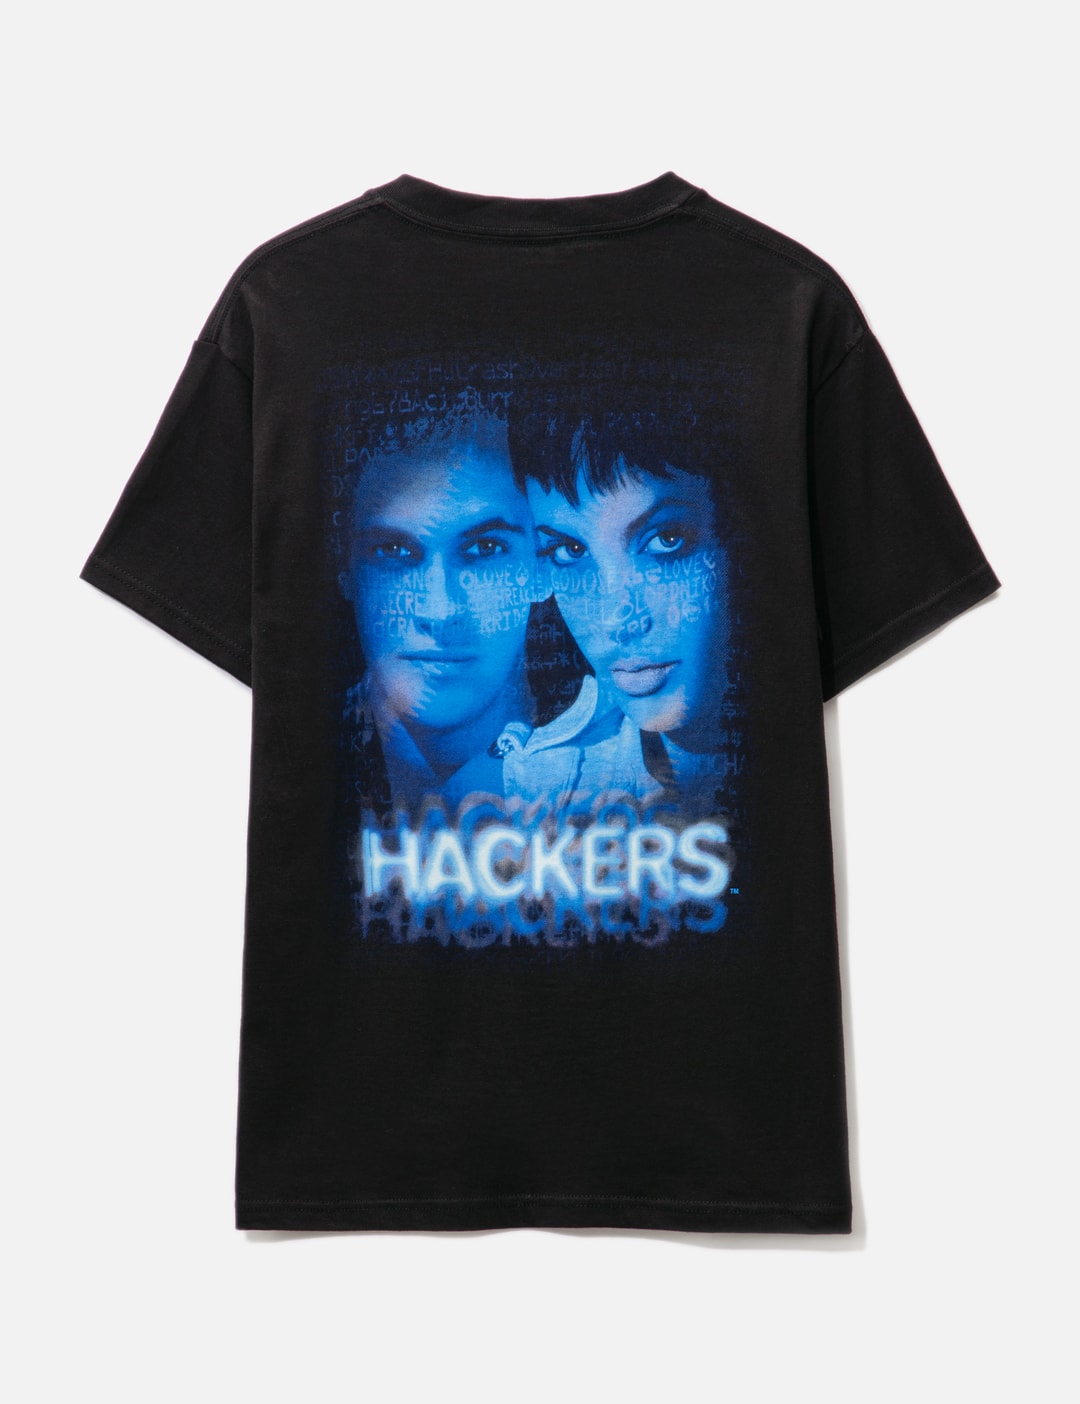 Pleasures - Hackers T-shirt  HBX - Globally Curated Fashion and Lifestyle  by Hypebeast